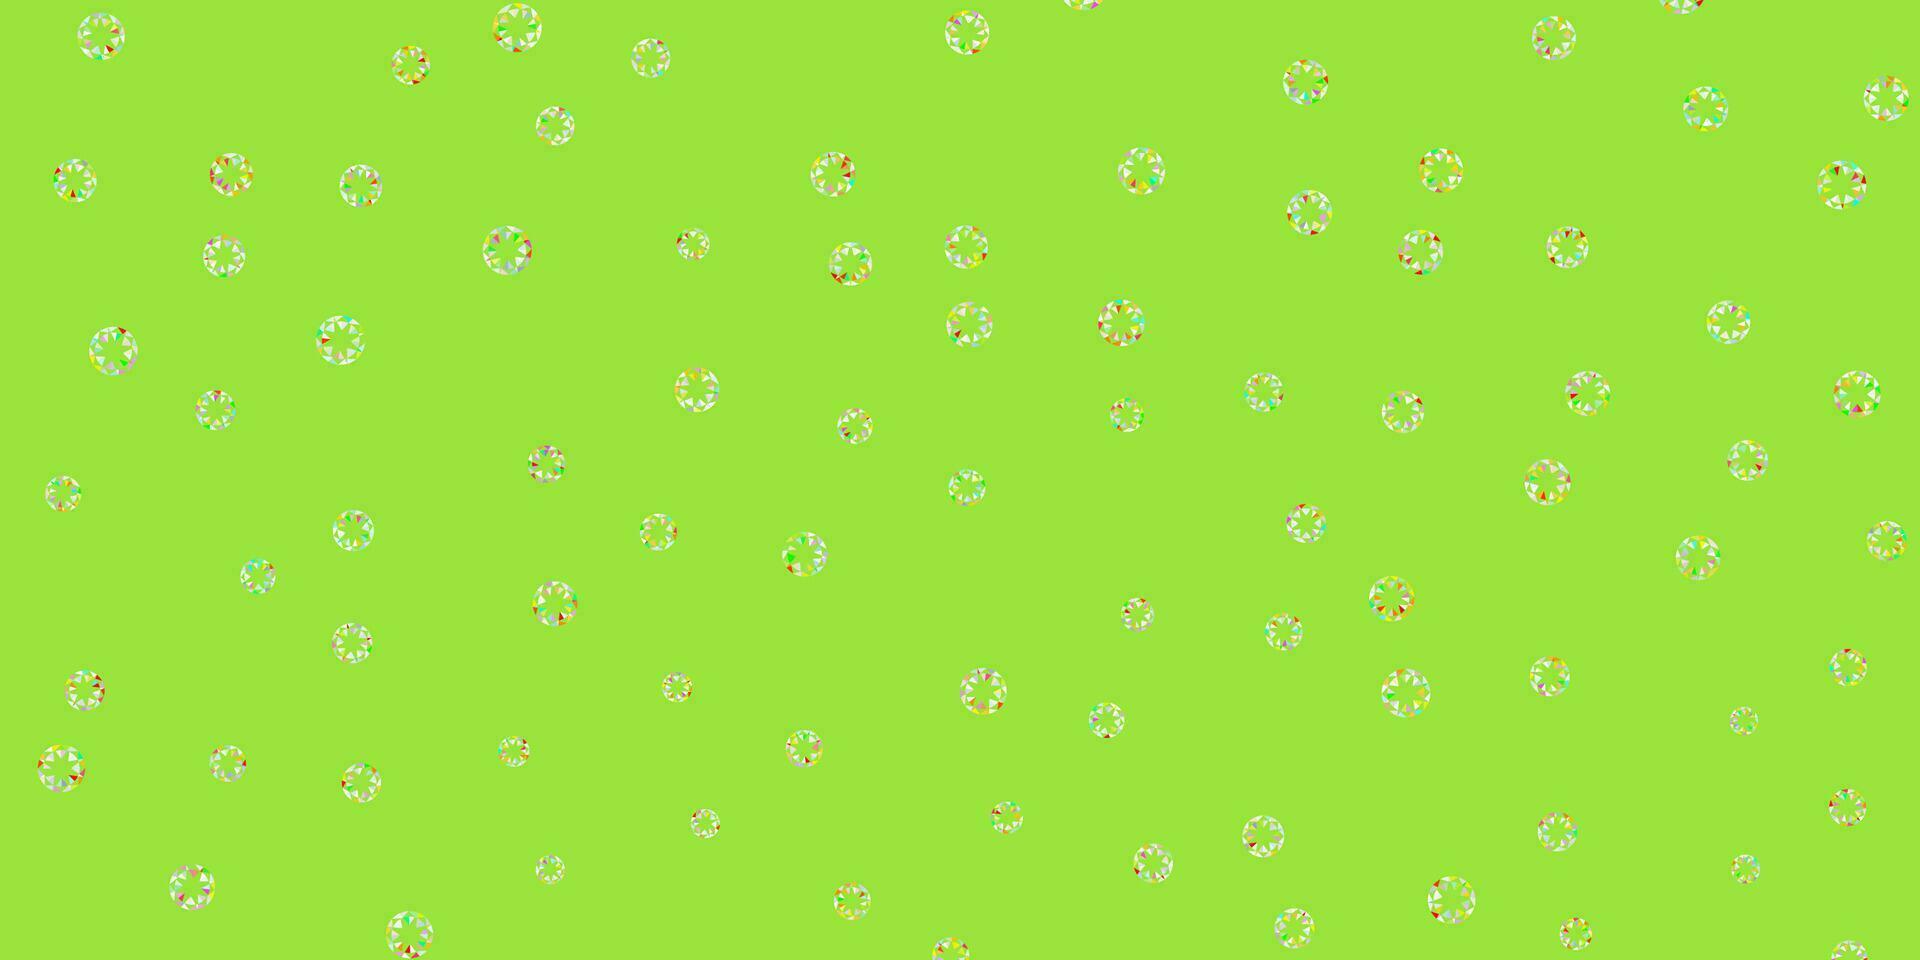 Light multicolor vector background with bubbles.